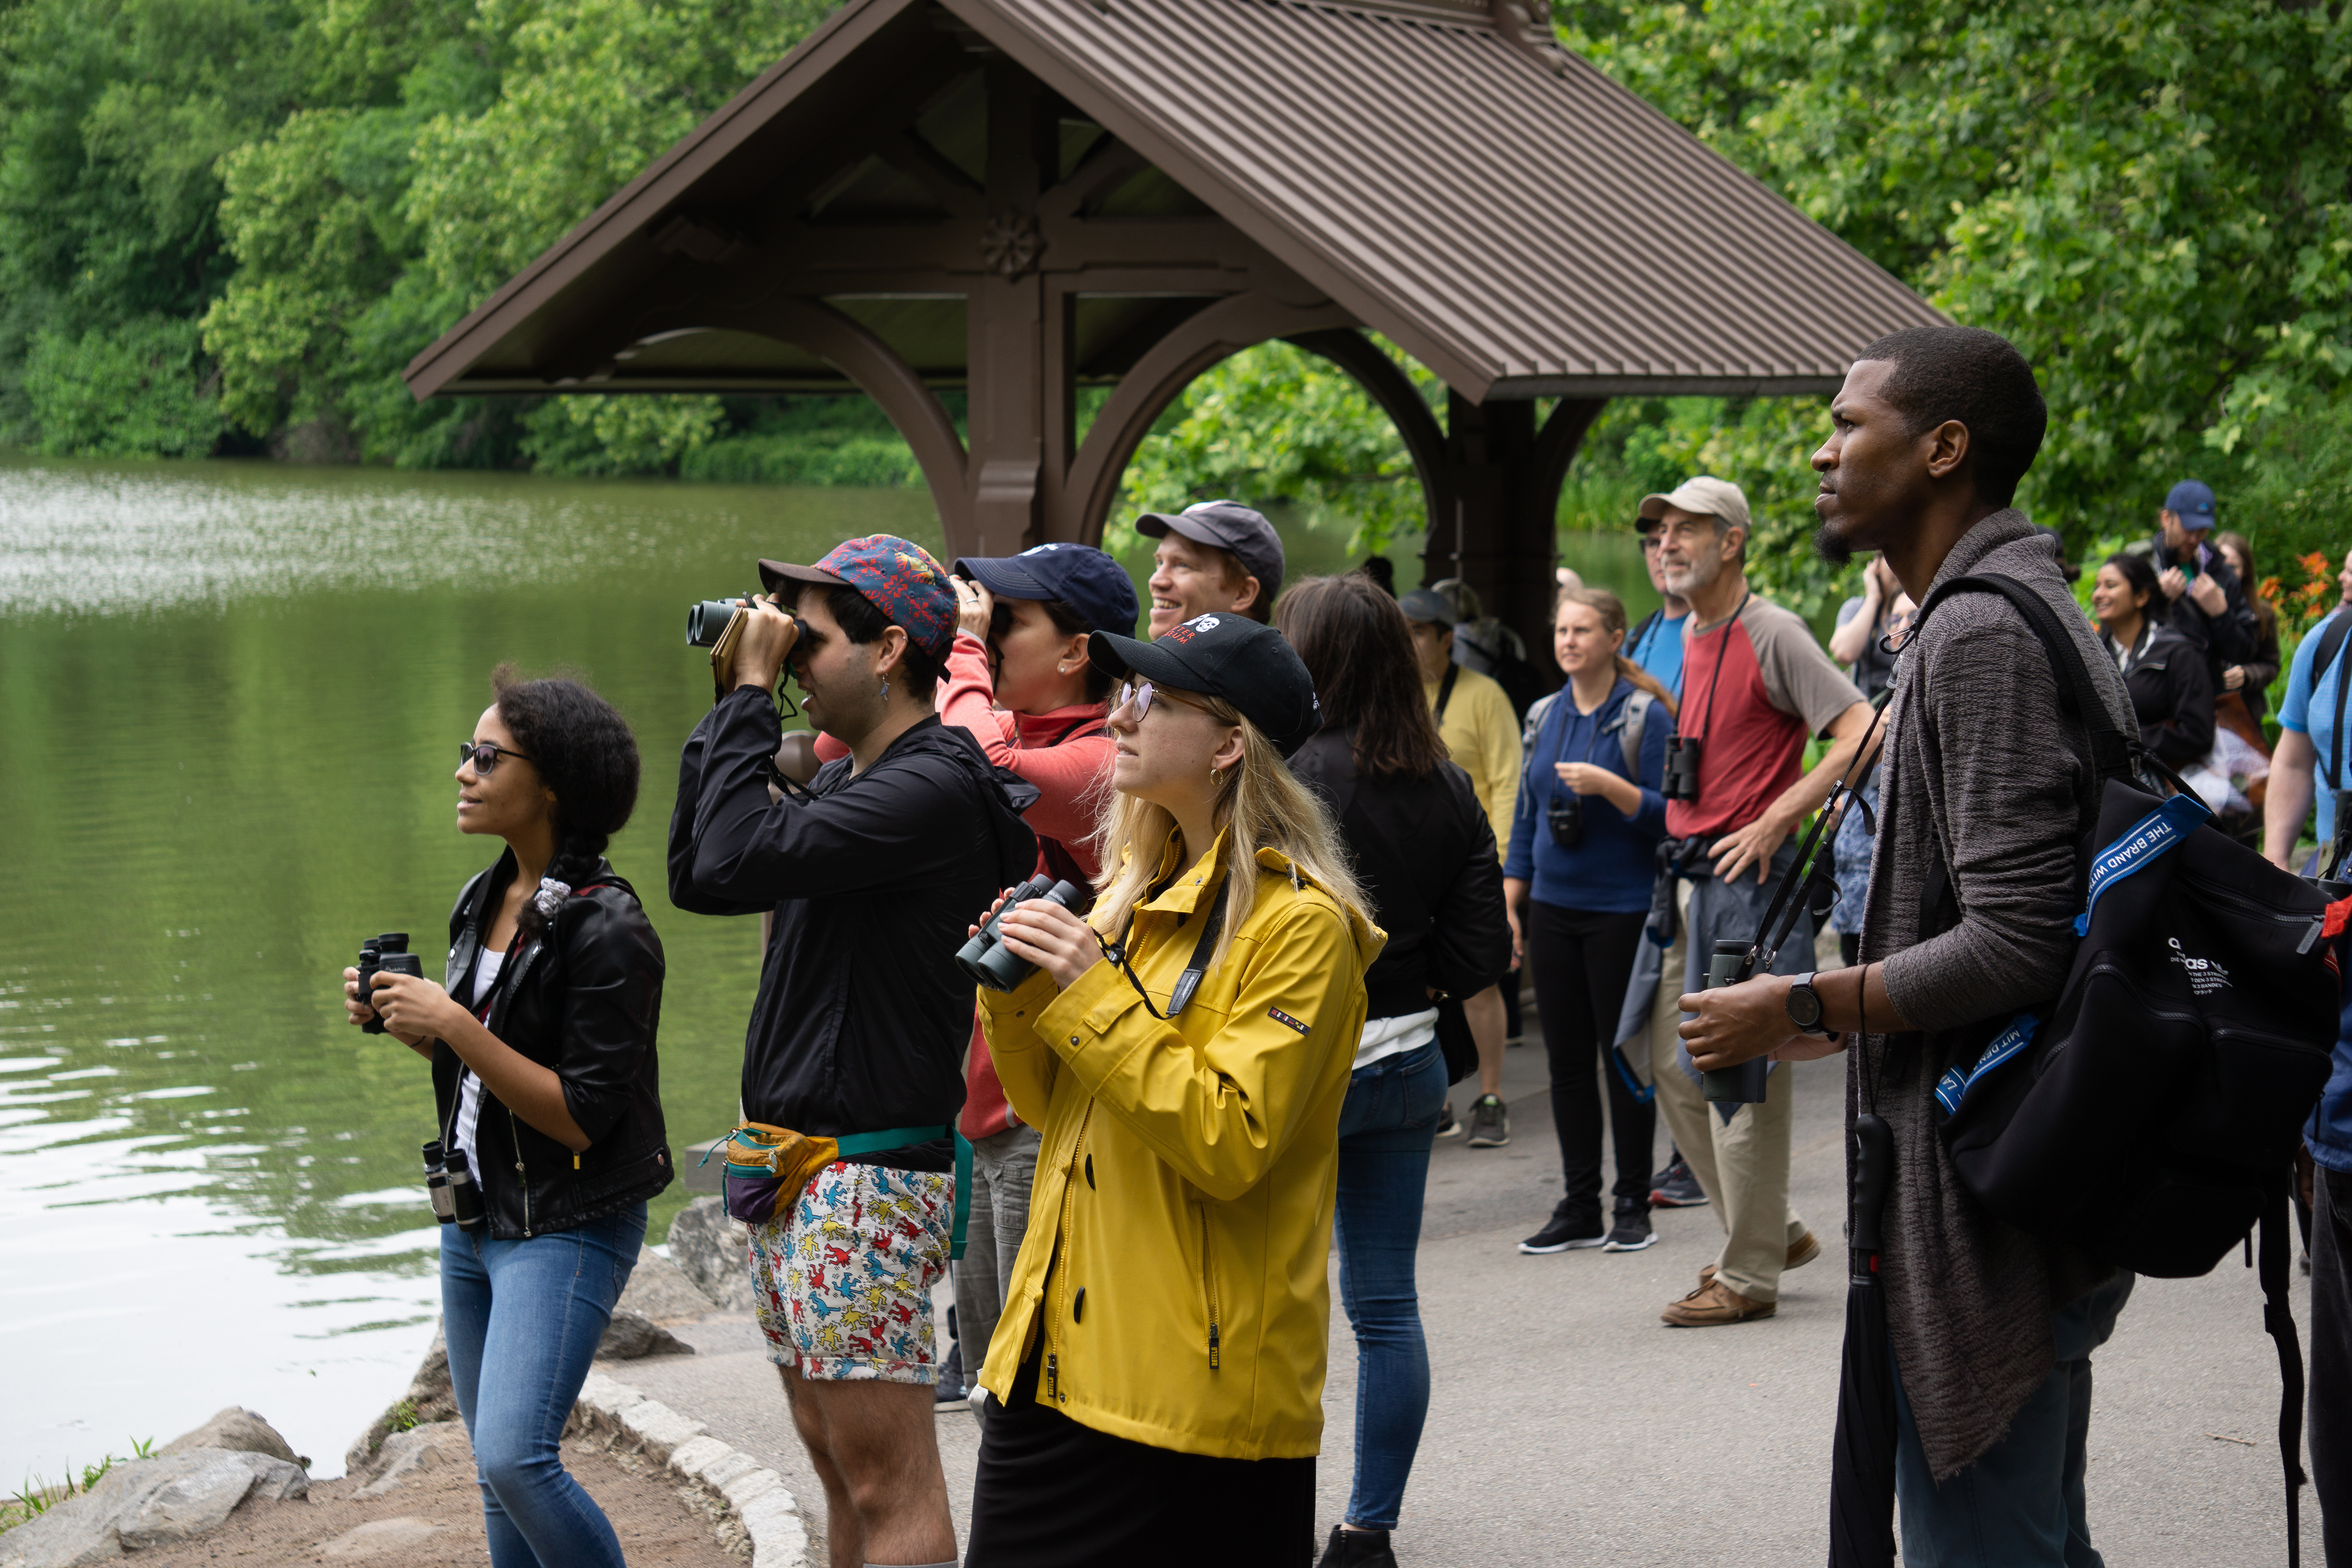 NYC Audubon leads our annual Pride Week bird walk in Central Park. Photo: NYC Audubon